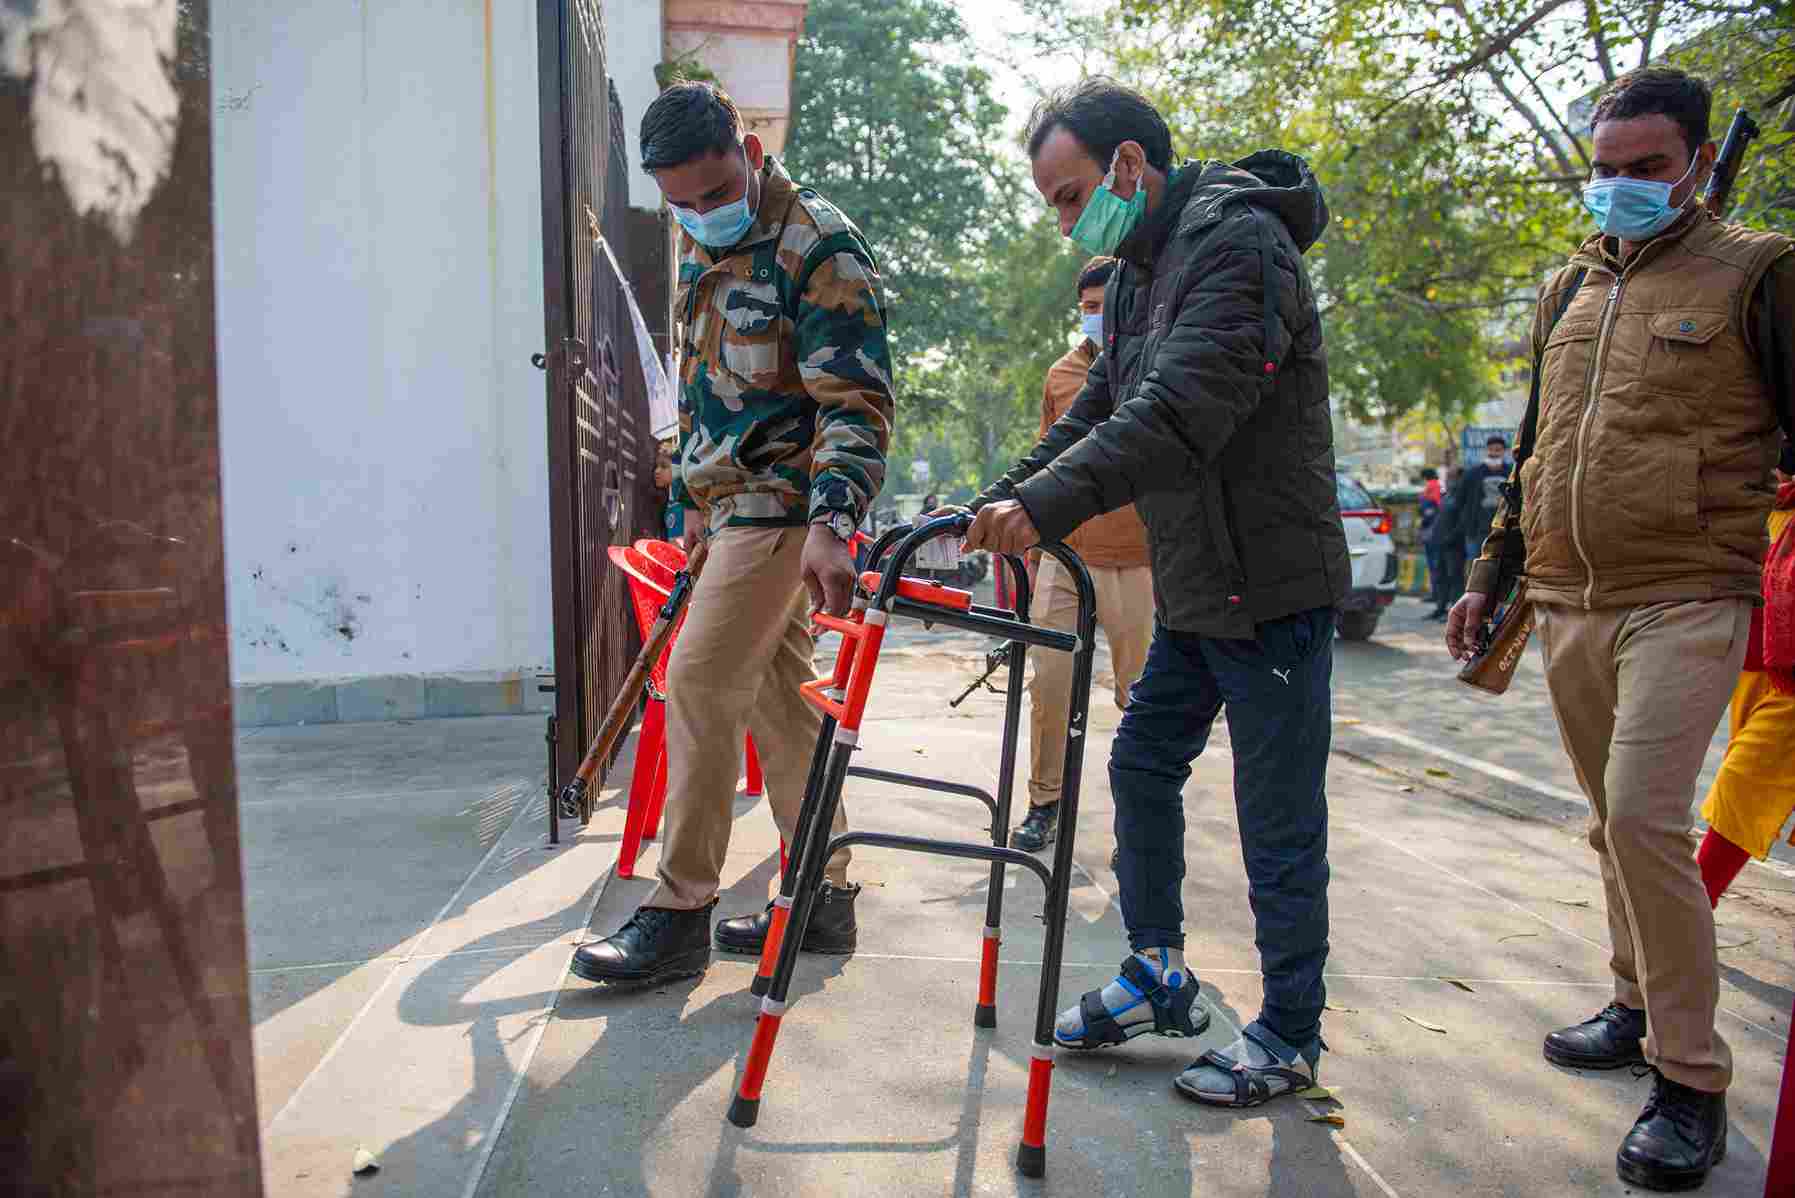 A disabled man being helped by a police officer into a polling booth in Ghaziabad, Uttar Pradesh in March 2022.